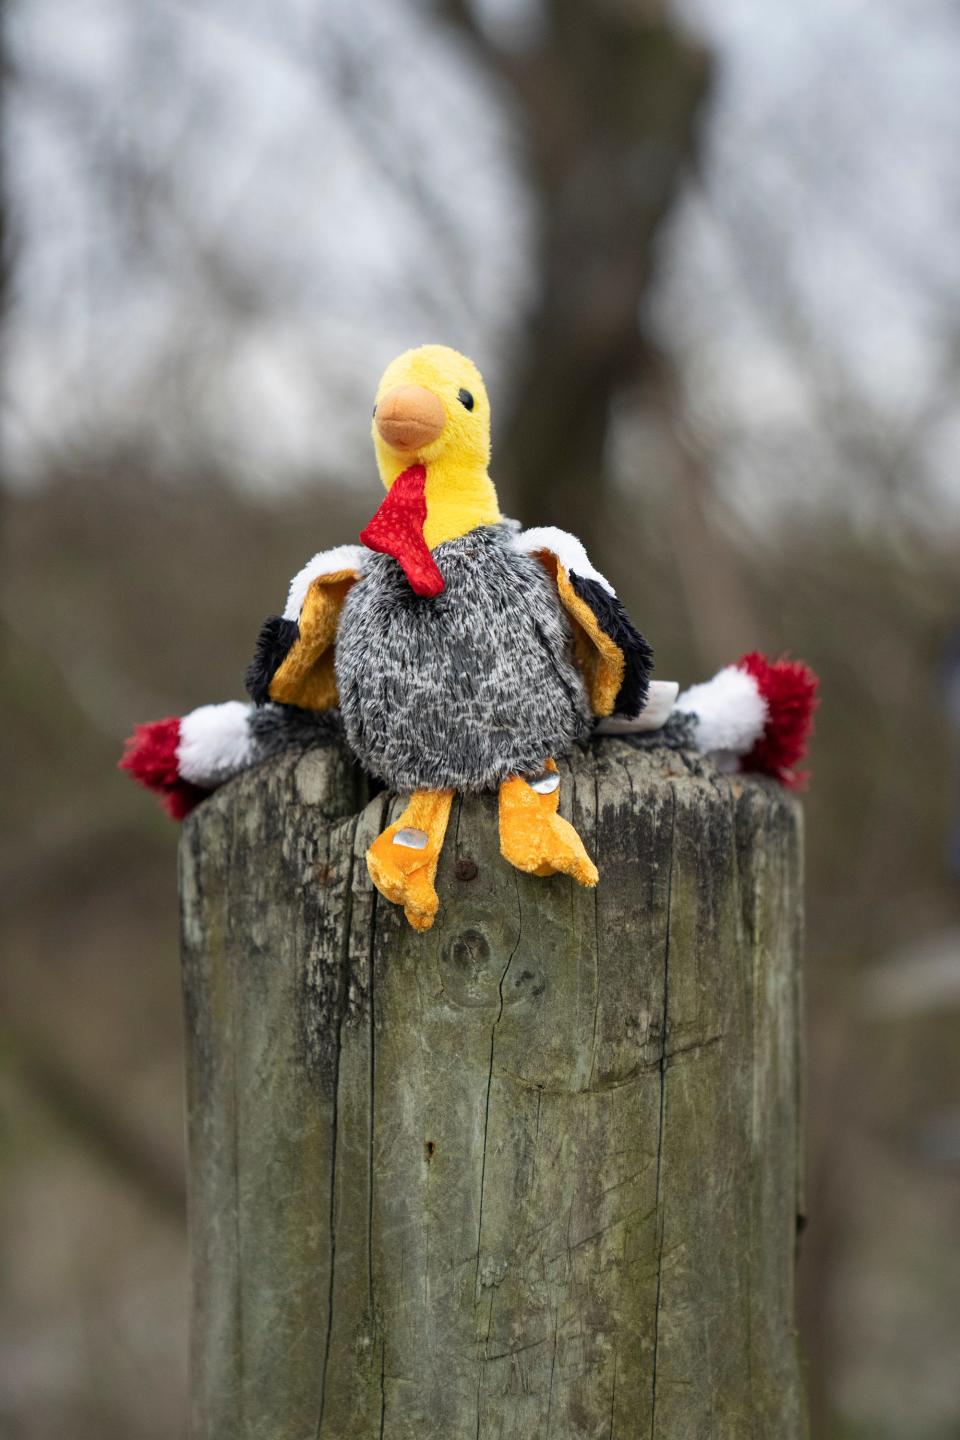 Stuffed animals decorate the wooden guardrail posts Monday near an area where visitors watch the nest of American bald eagles Annie, Apollo and their hatchlings along the Scioto River near Dublin Road in Columbus.